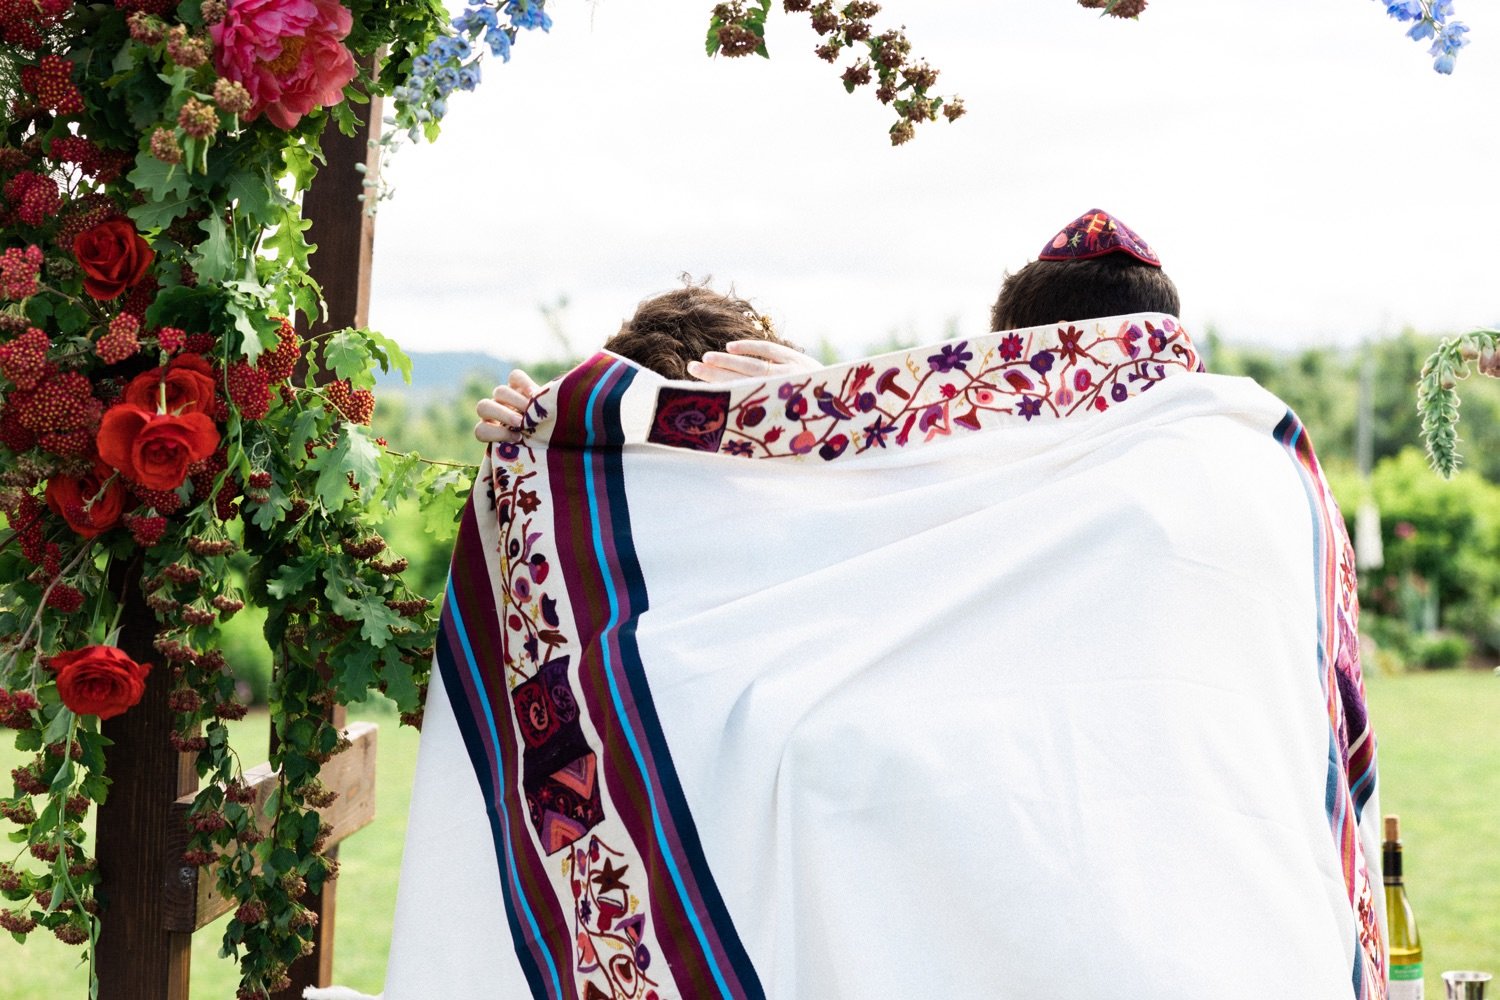 054_The Orchard Hood River Wedding96_bride and groom wrap in shawl during jewish wedding ceremony.jpg